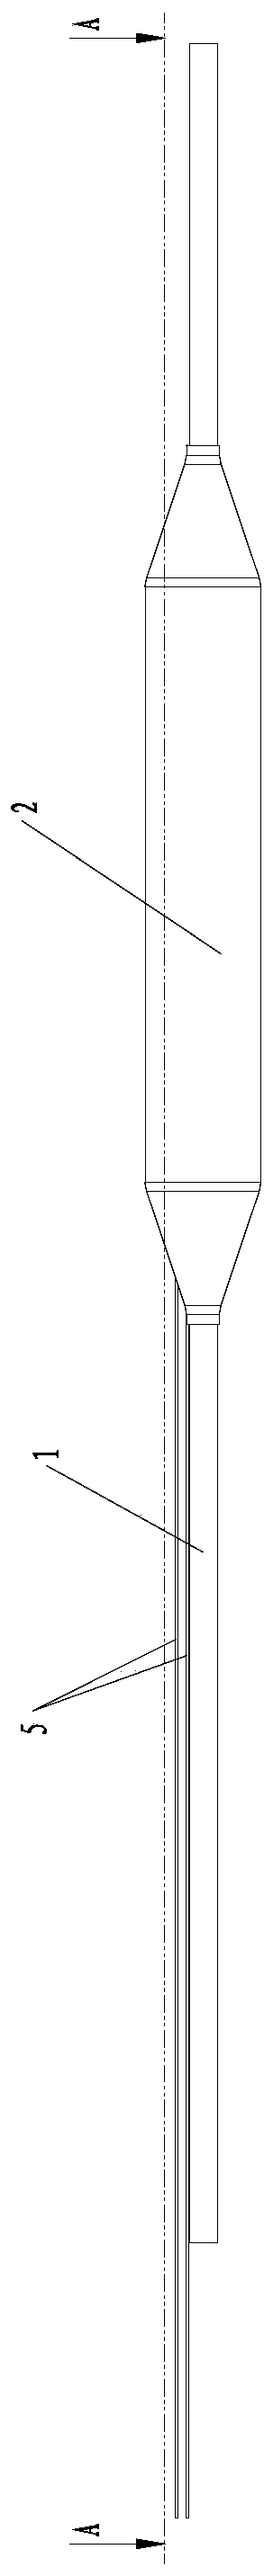 Ultrasound balloon catheter assembly and catheter system, and usage method